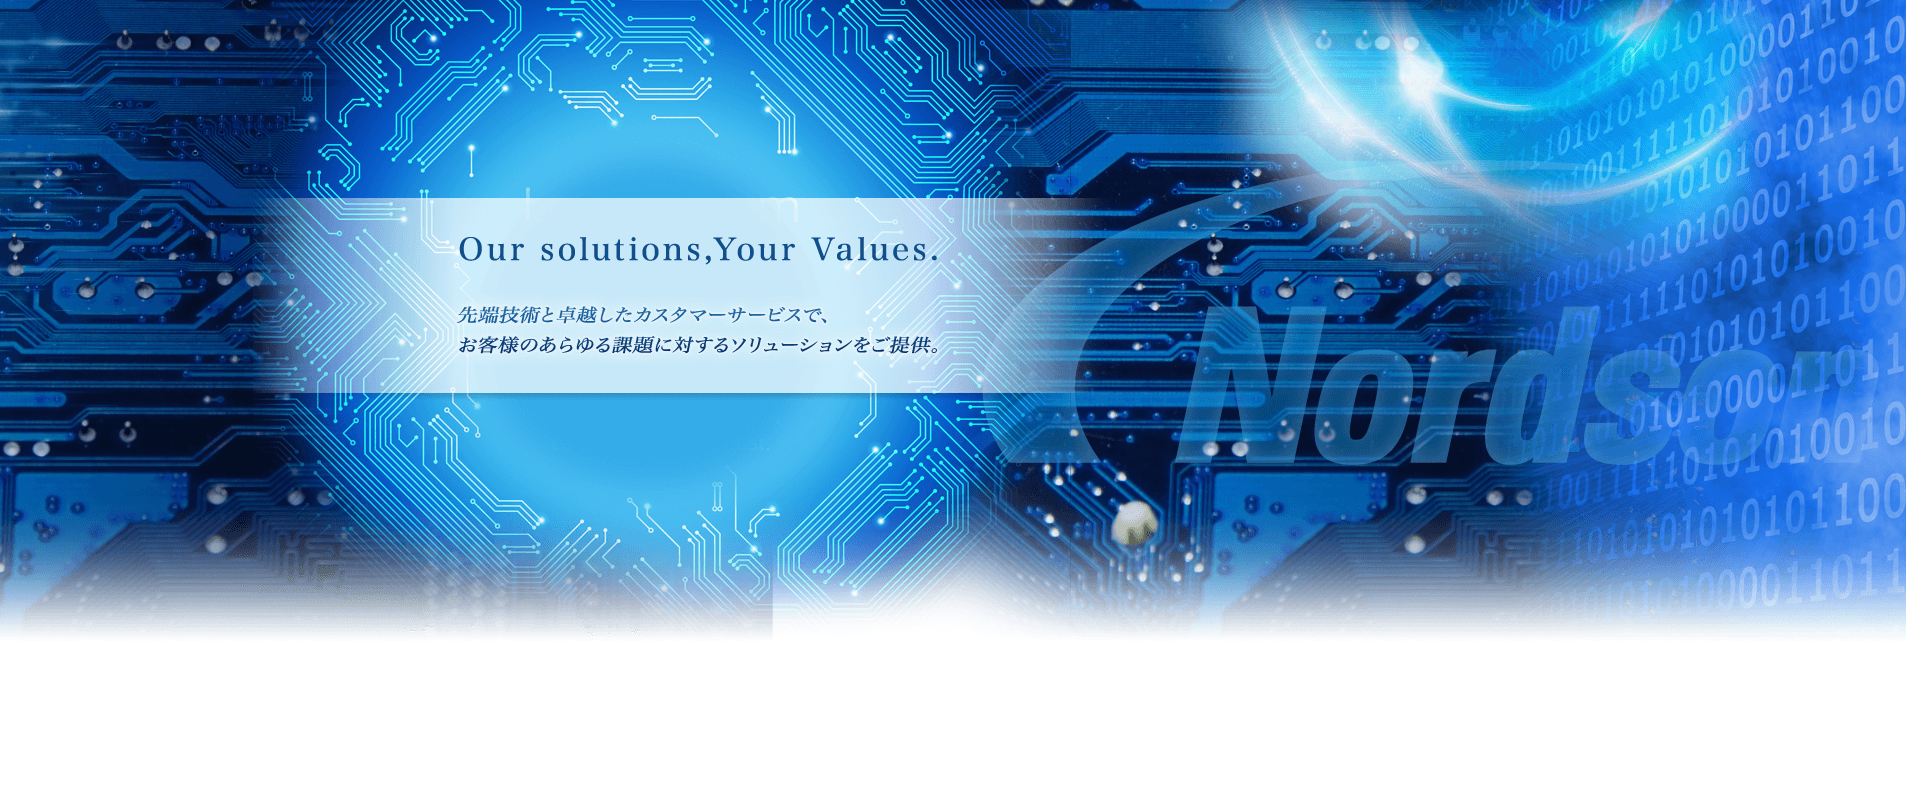 Our solutions,Your Values.